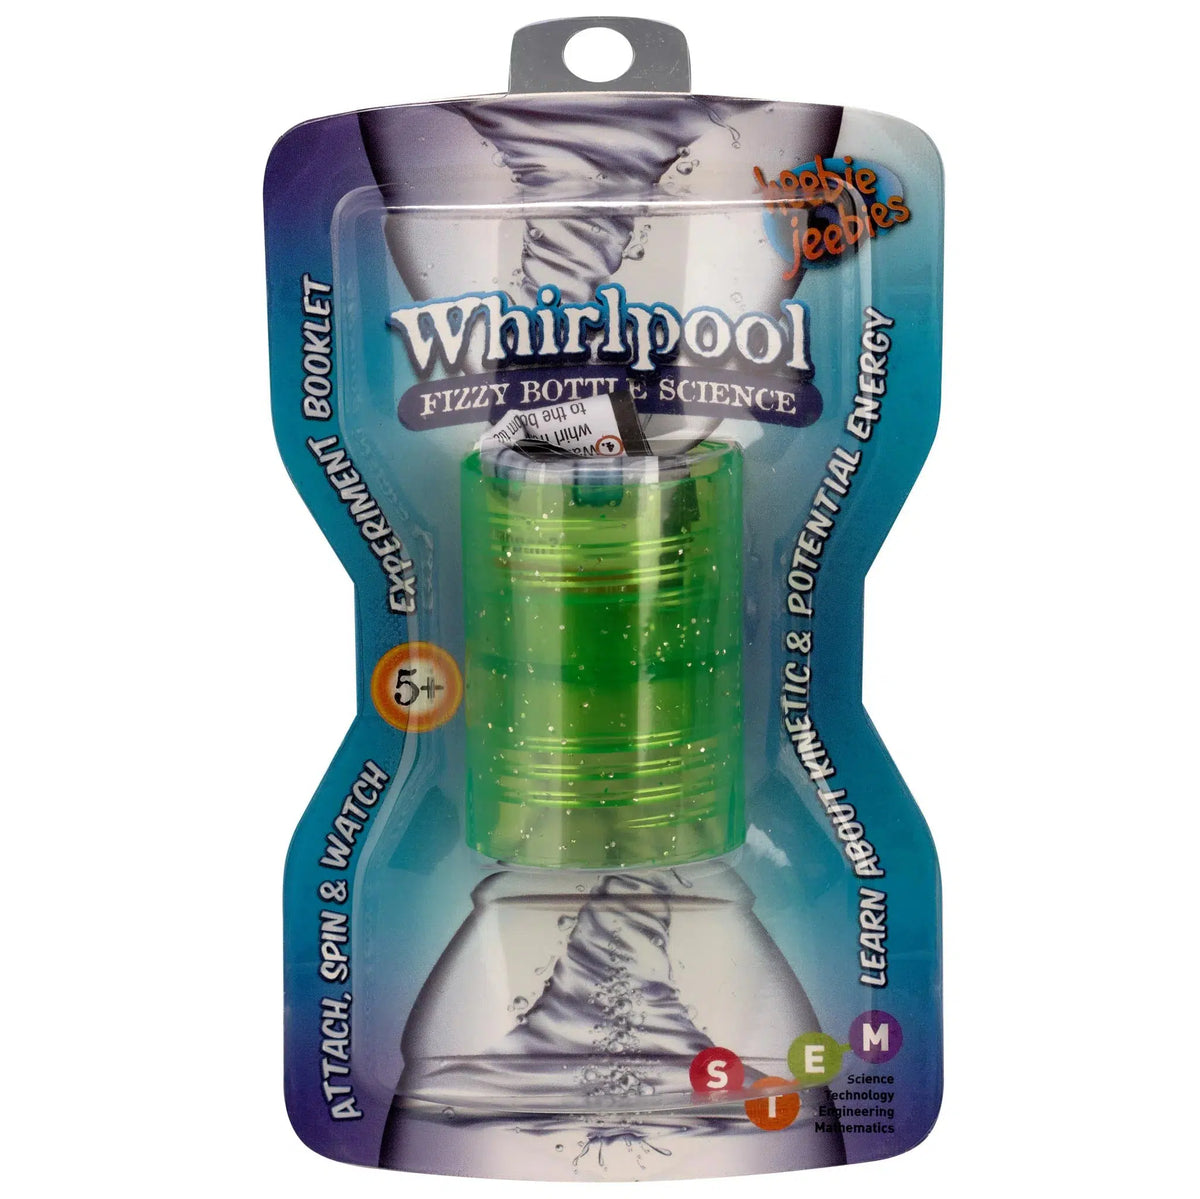 Front view of Whirlpool Fizzy Bottle Science in its package.